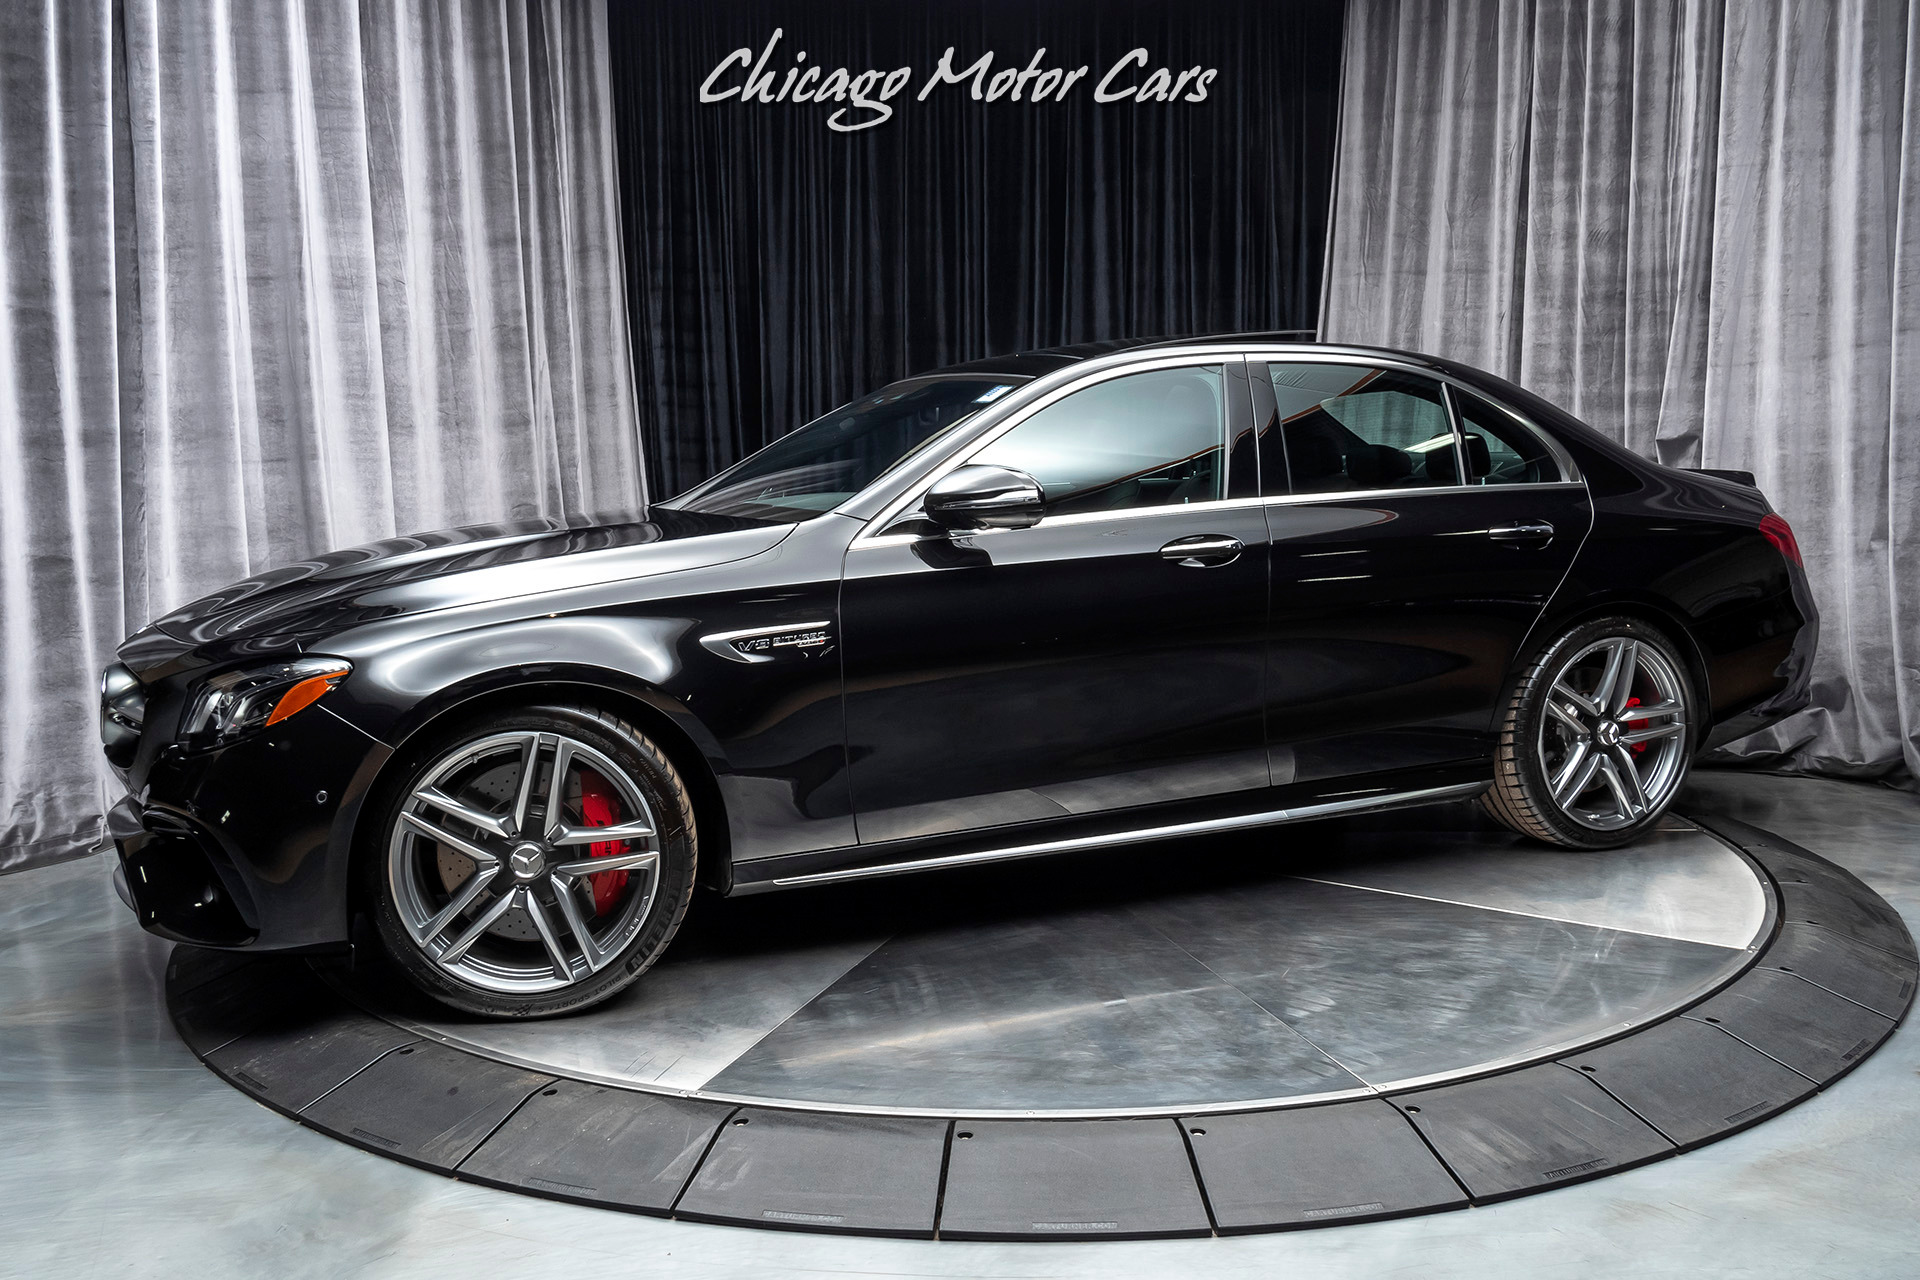 Used 2019 Mercedes-Benz E63 AMG S 4Matic Sedan MSRP $125K+ LOADED WITH  OPTIONS! For Sale (Special Pricing) | Chicago Motor Cars Stock #16868